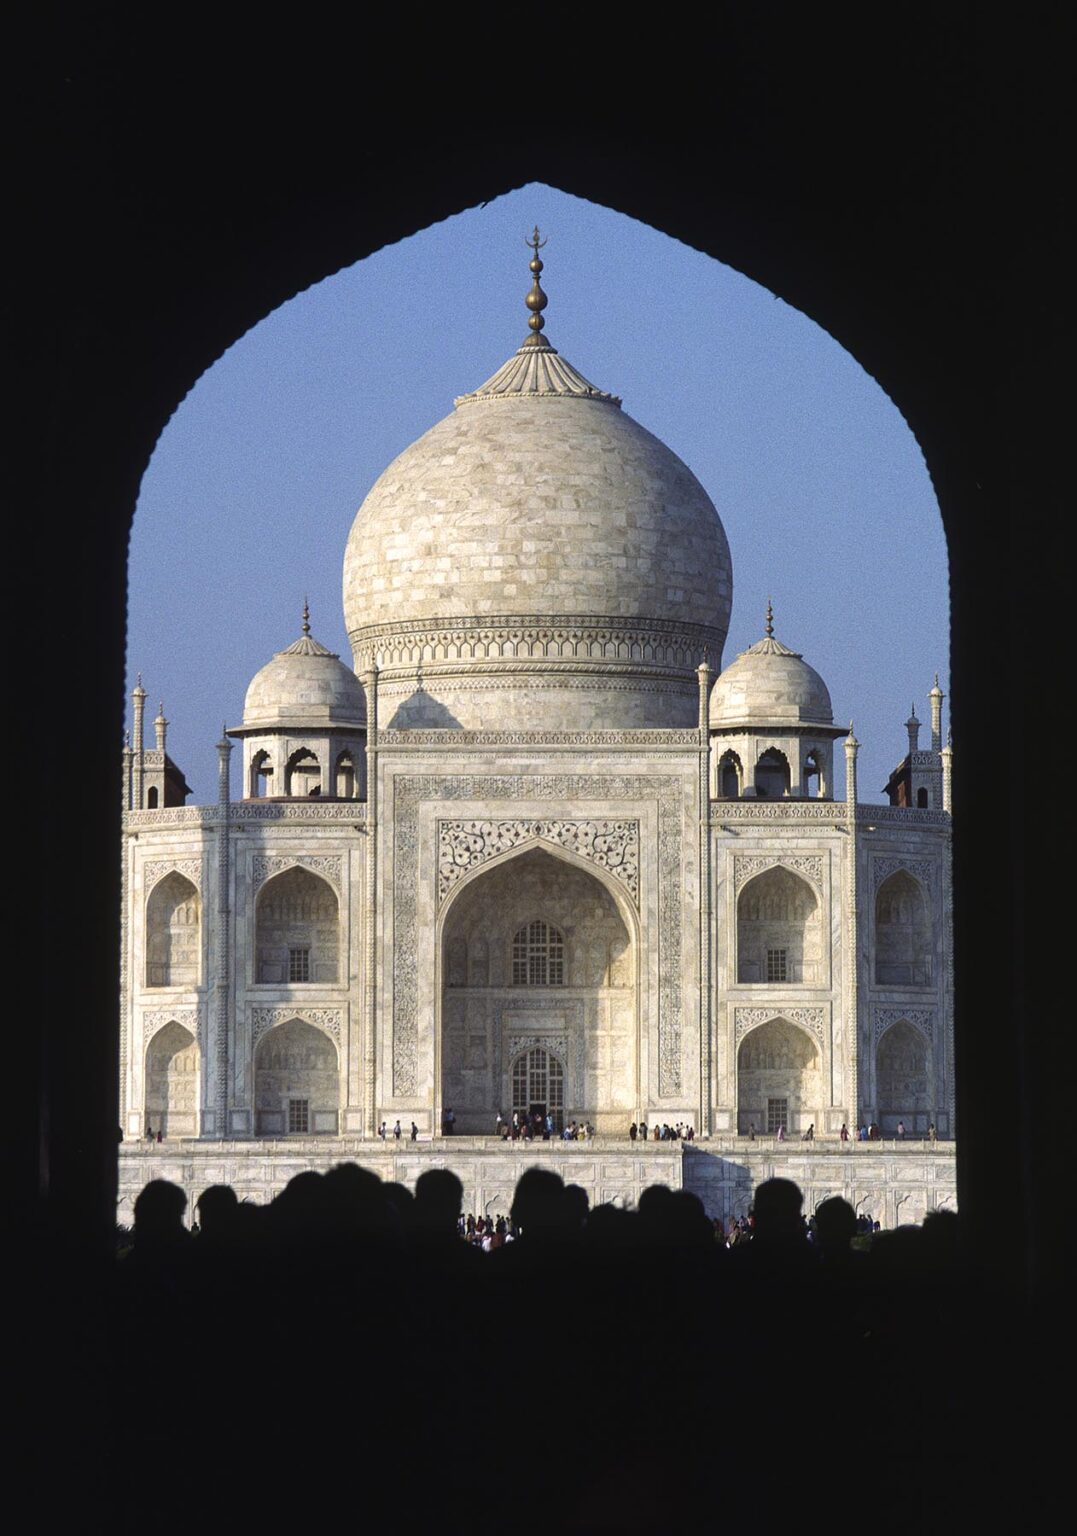 The TAJ MAHAL, built in 1653, is seen over tourist heads from under an ISLAMIC ARCH - AGRA, INDIA